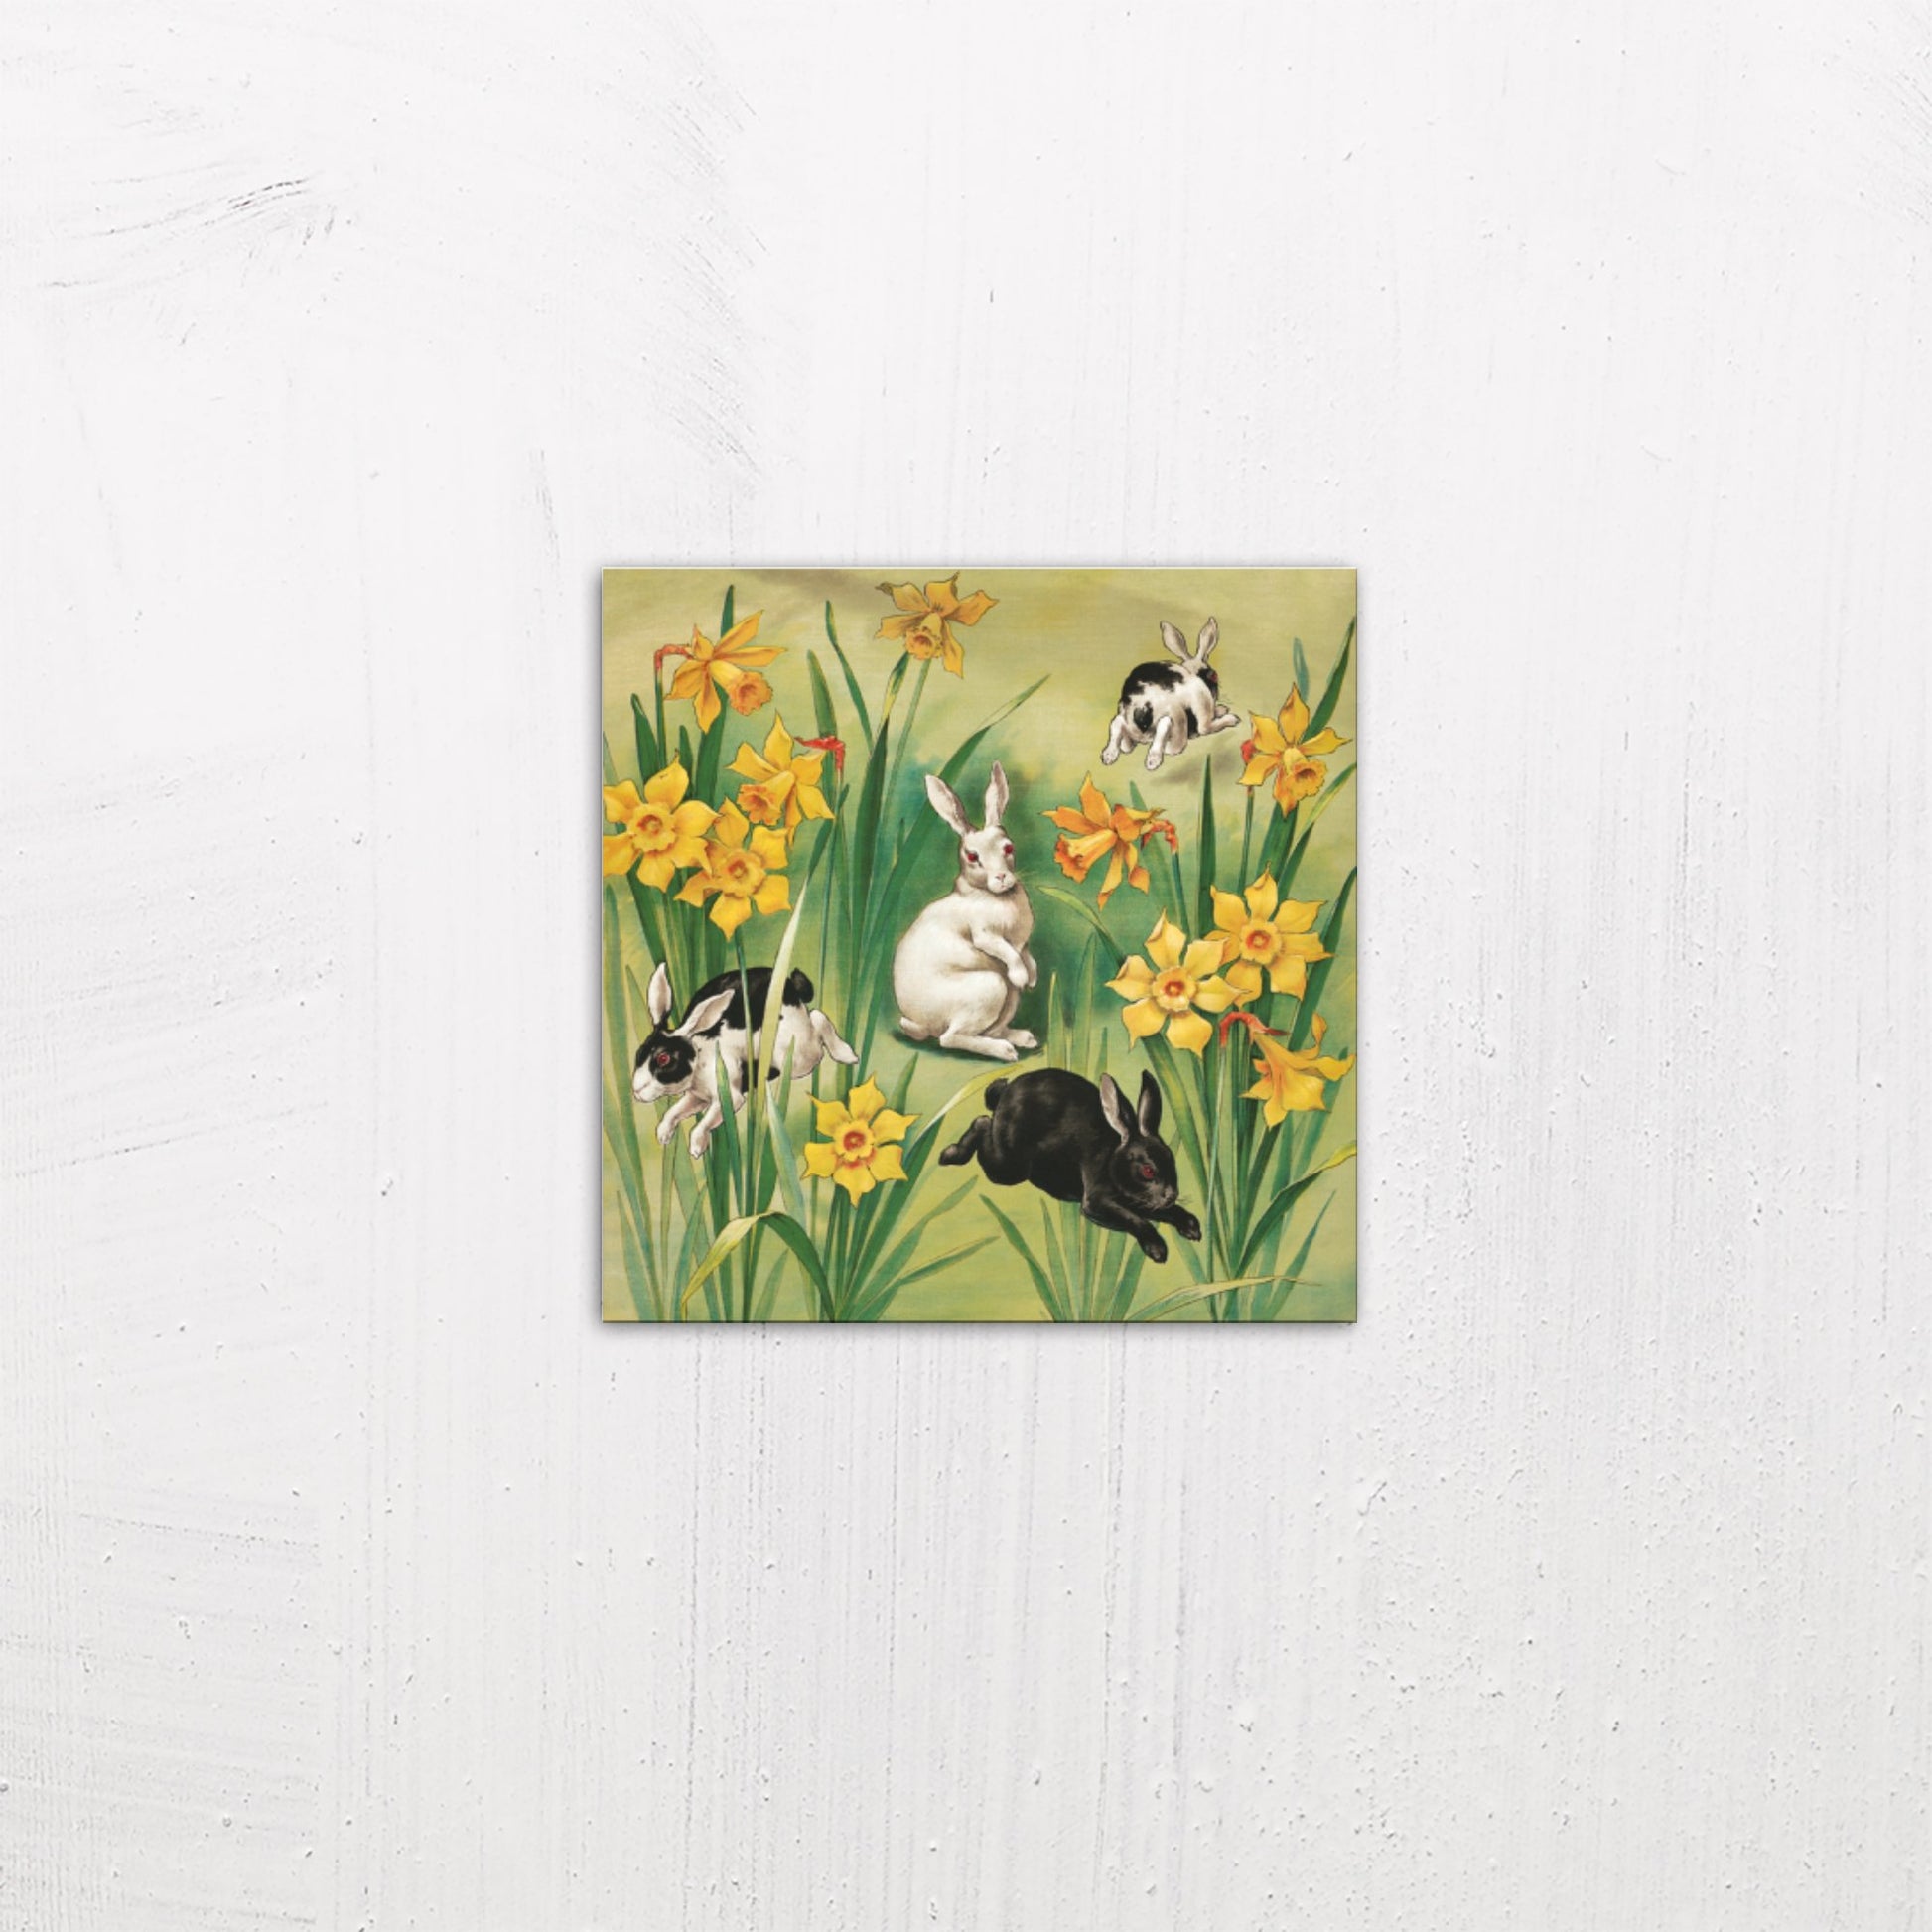 A small size metal art poster display plate with printed design of a Bunnies and Daffodils Vintage Illustration